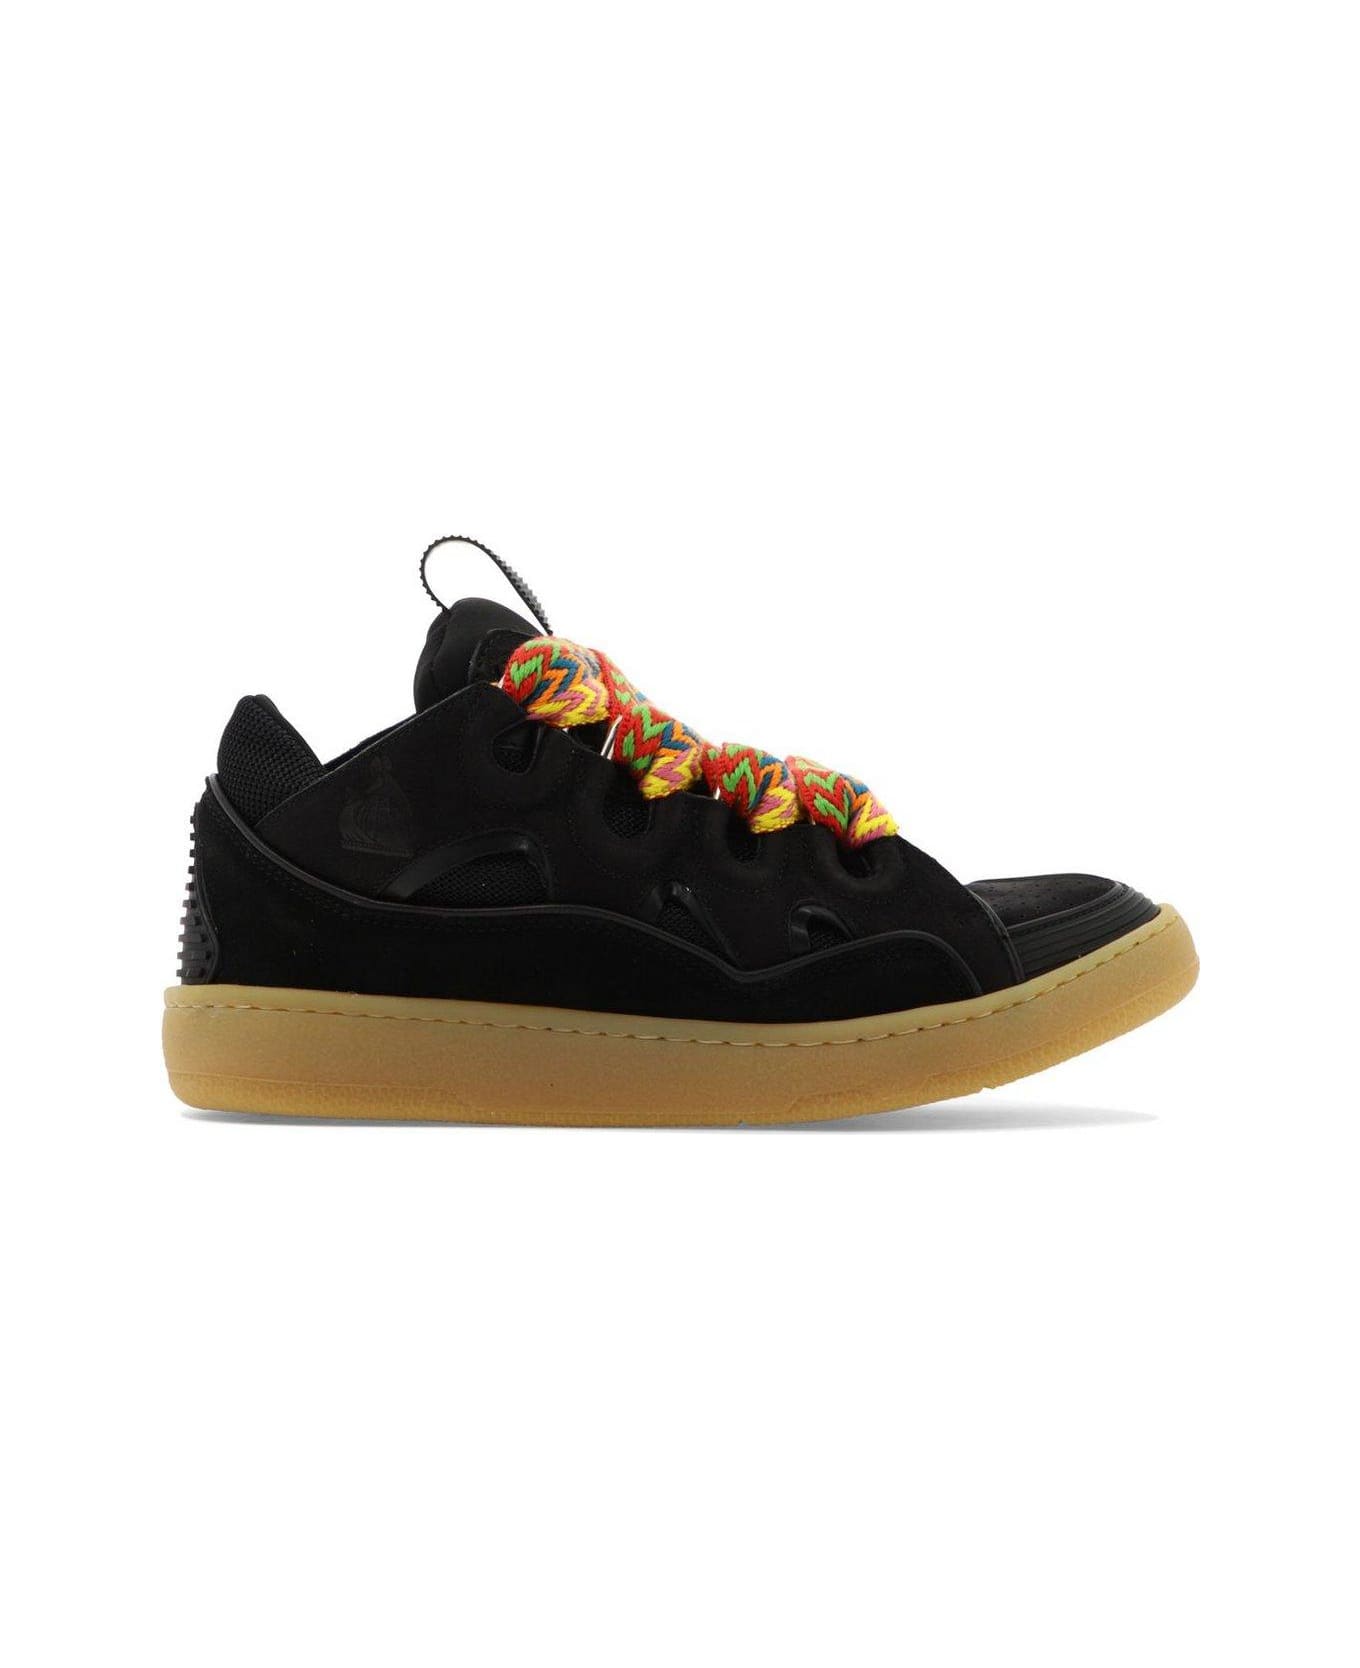 Lanvin Curb Panelled Lace-up Sneakers - Black